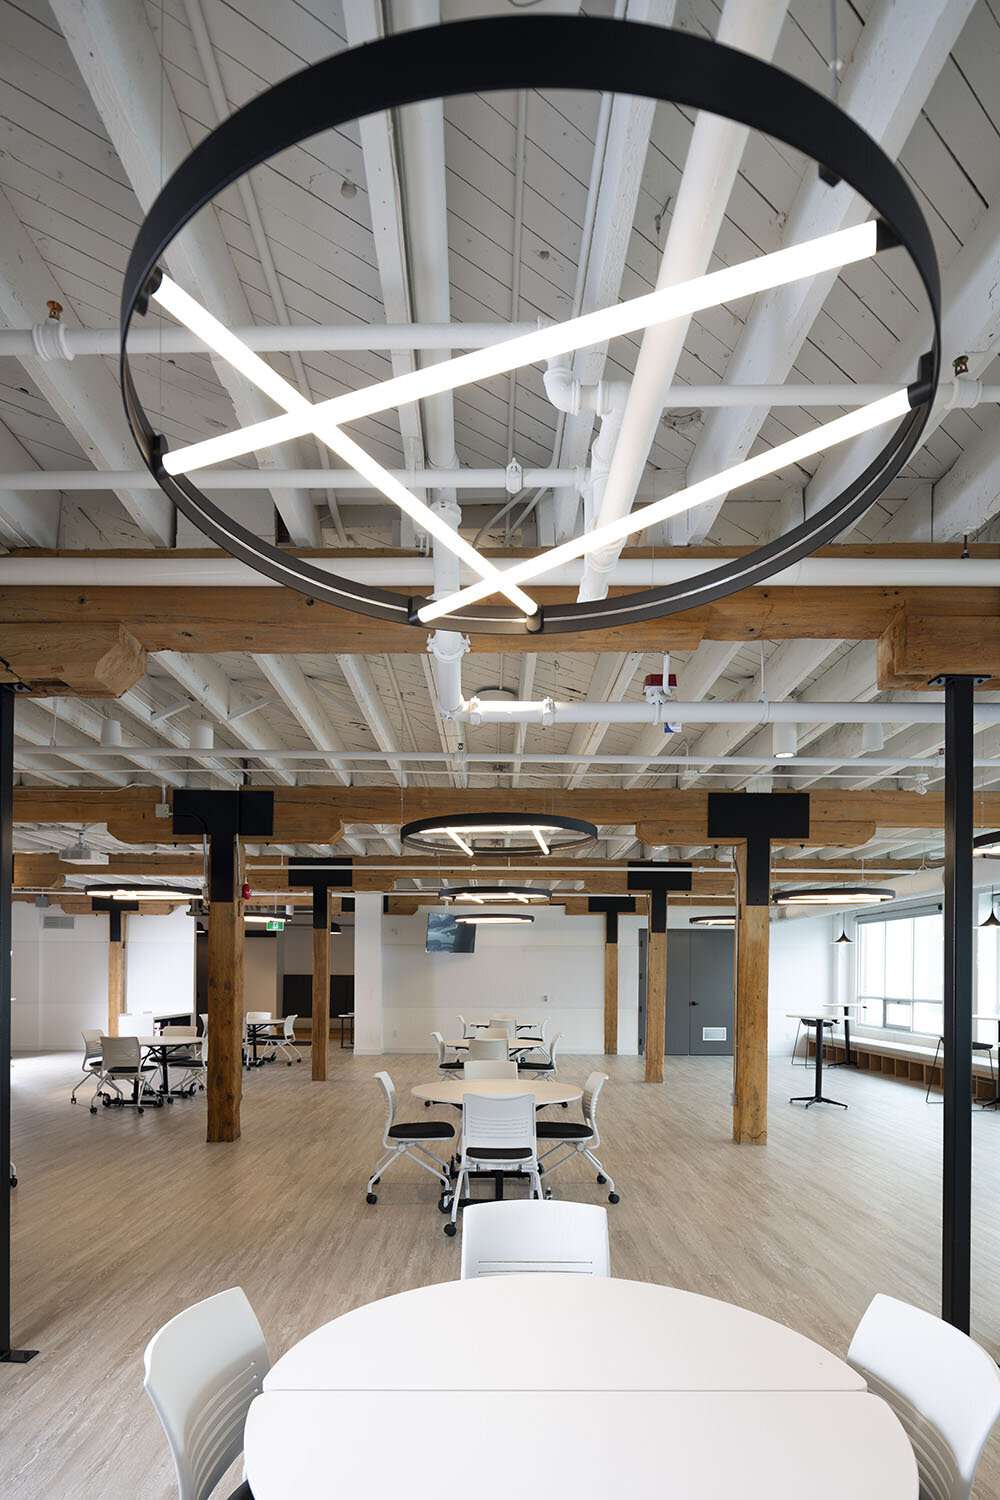 A unique lighting fixture in the large meeting / event space. © robert lowdon